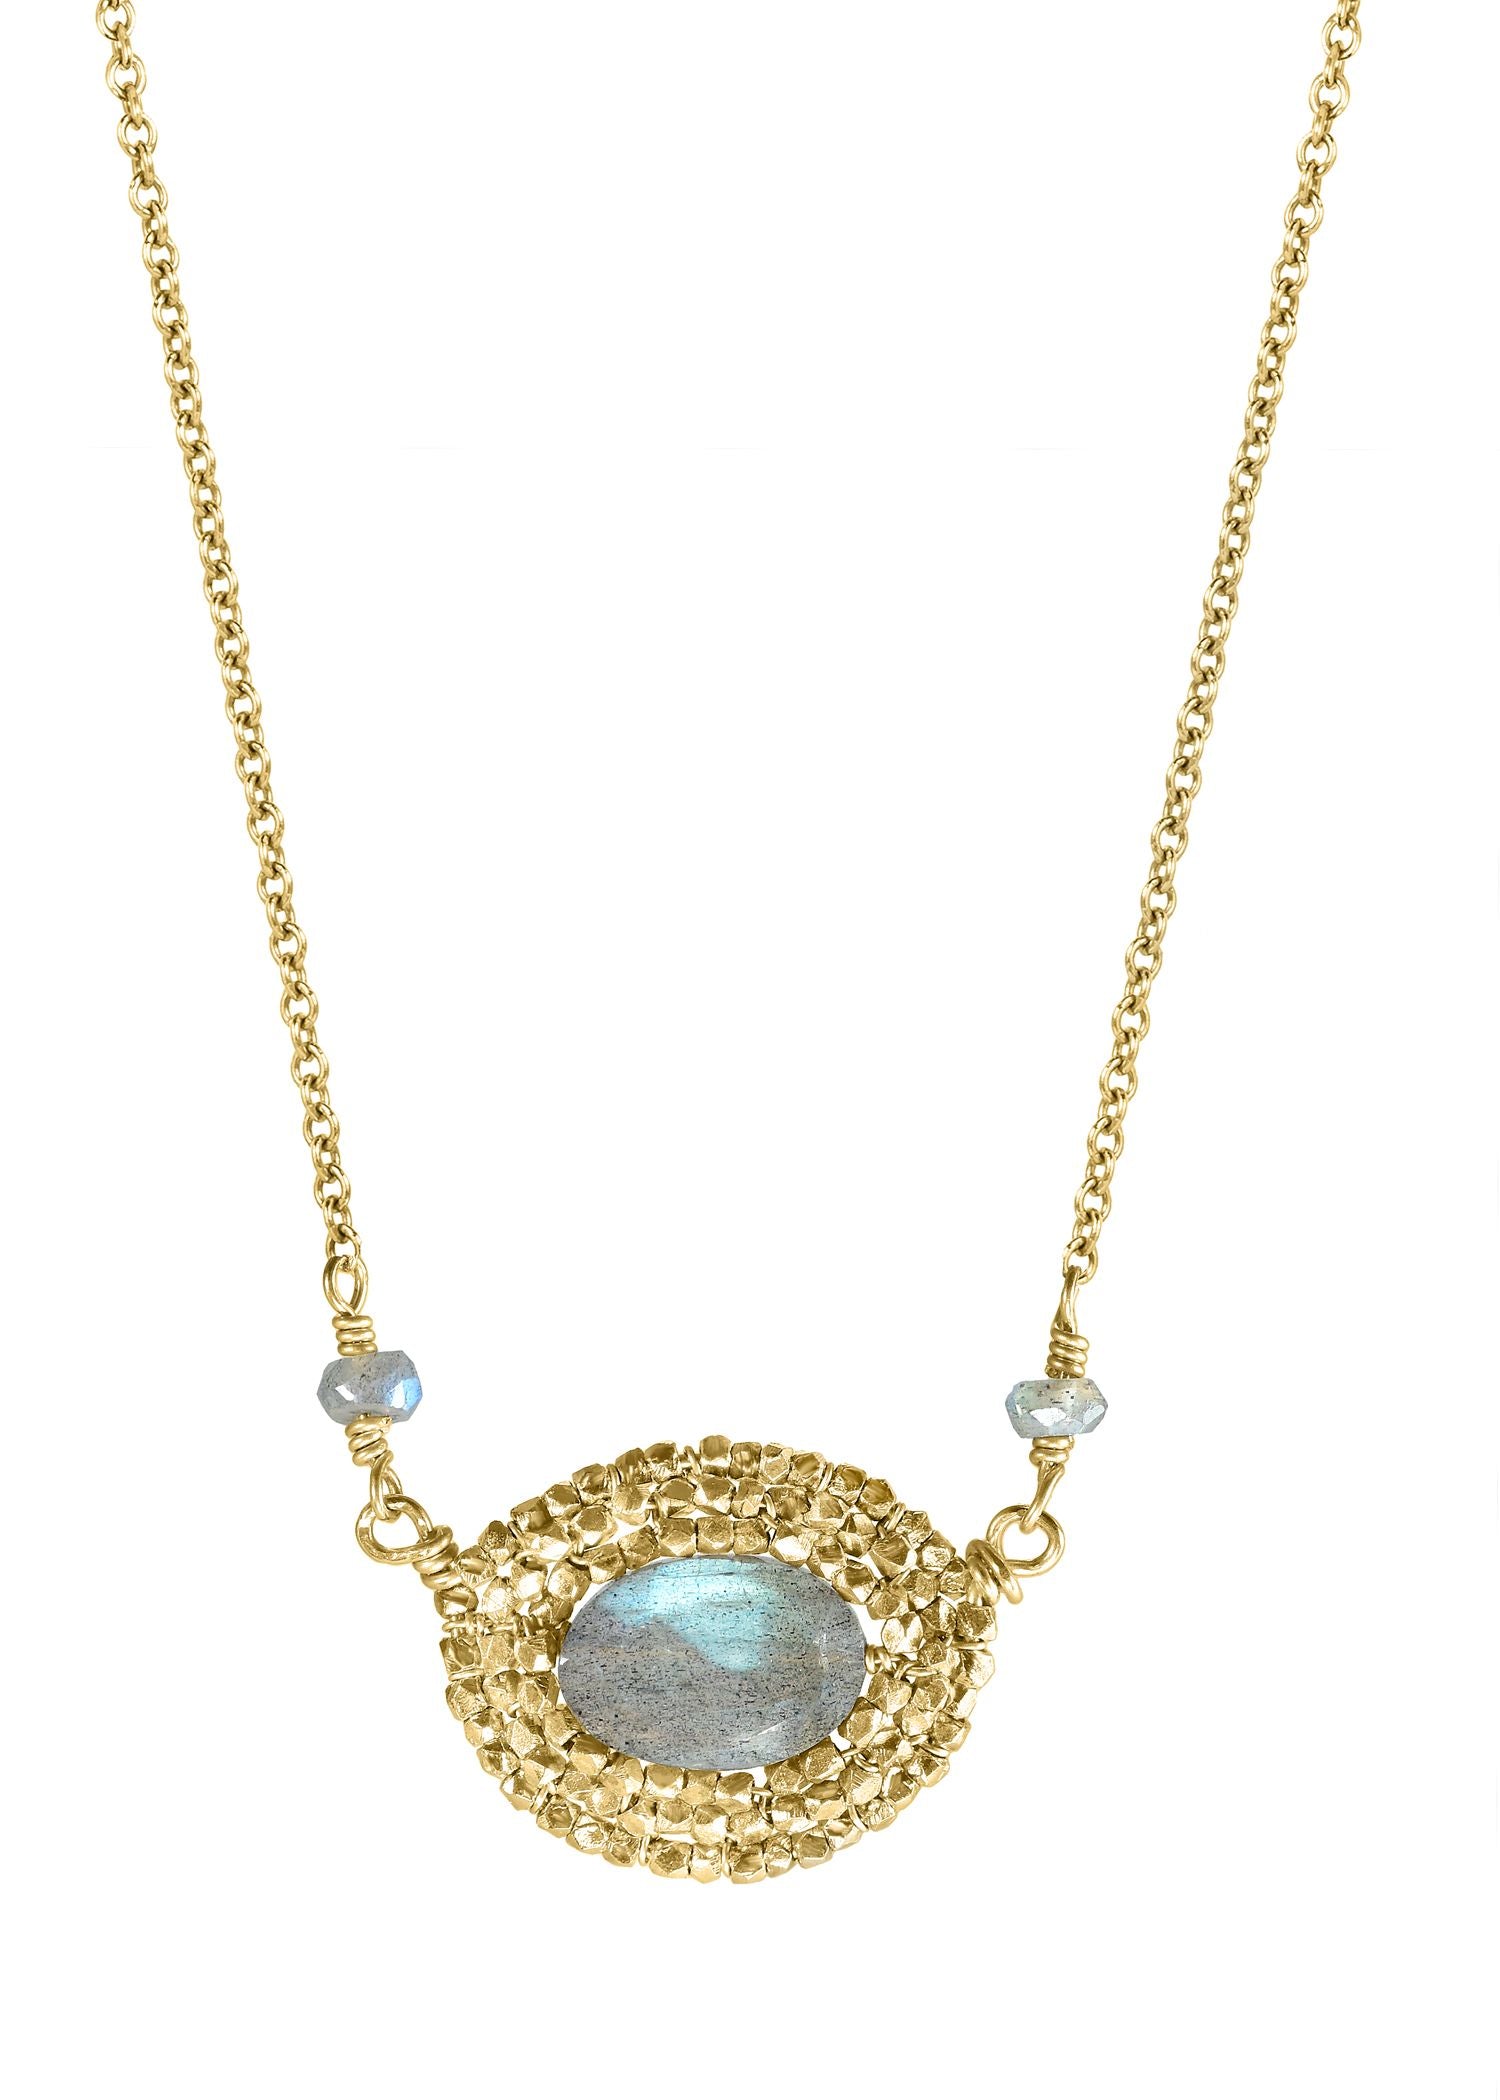 Labradorite 14k gold fill and 14k gold vermeil sterling silver Mixed metal Necklace measures 16” in length Pendant measures 1/2” in length and 5/8” in width Handmade in our Los Angeles studio